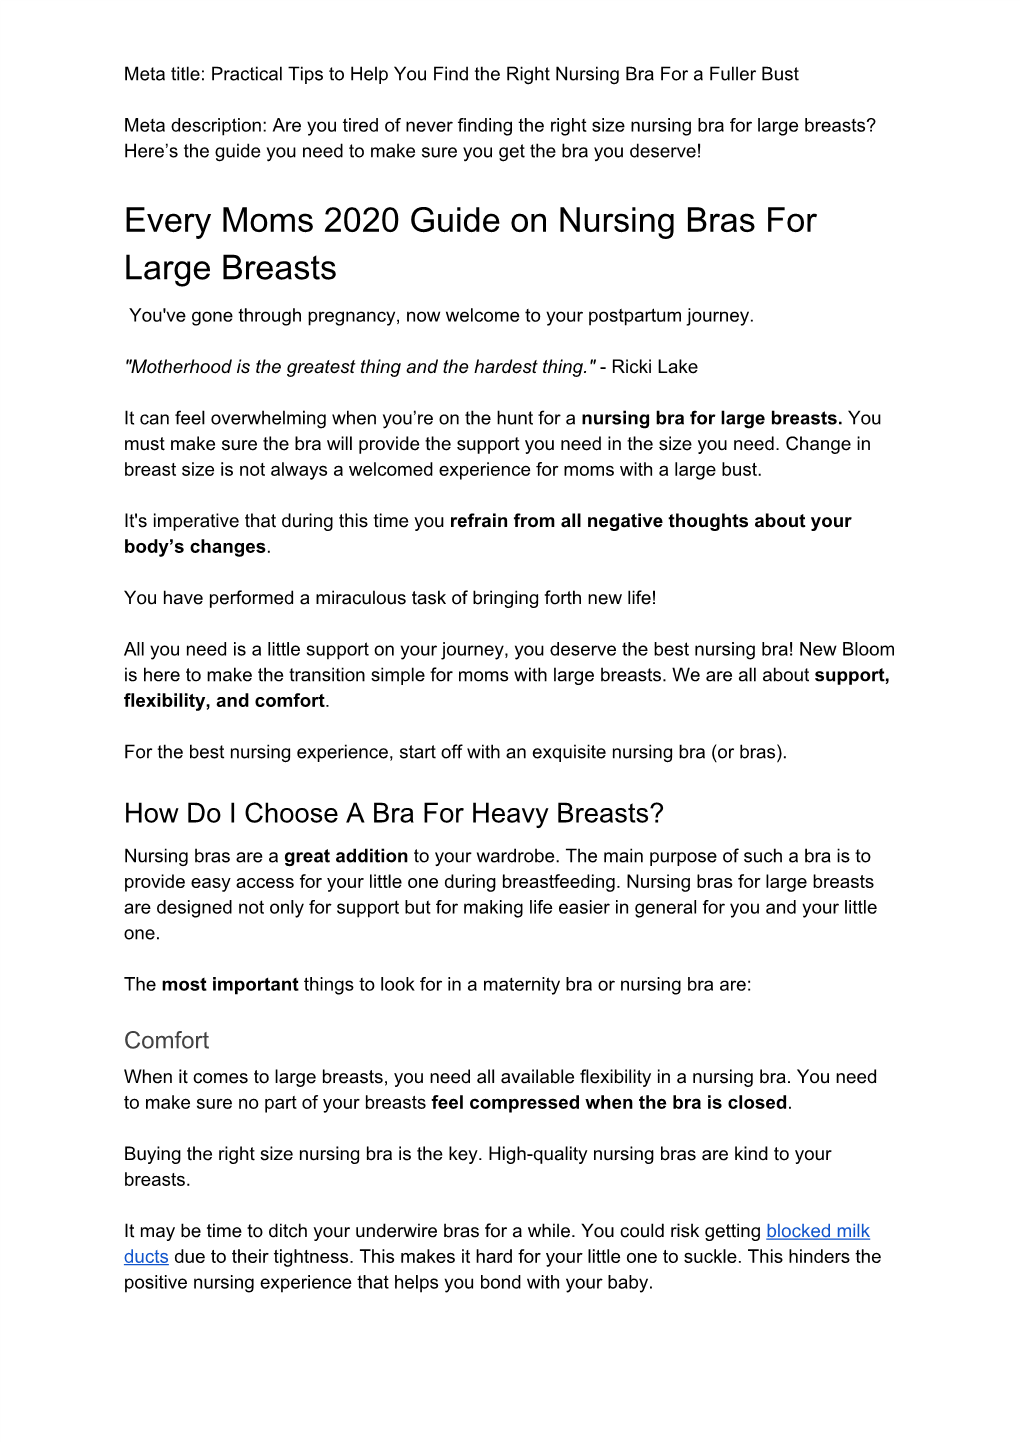 Every Moms 2020 Guide on Nursing Bras for Large Breasts